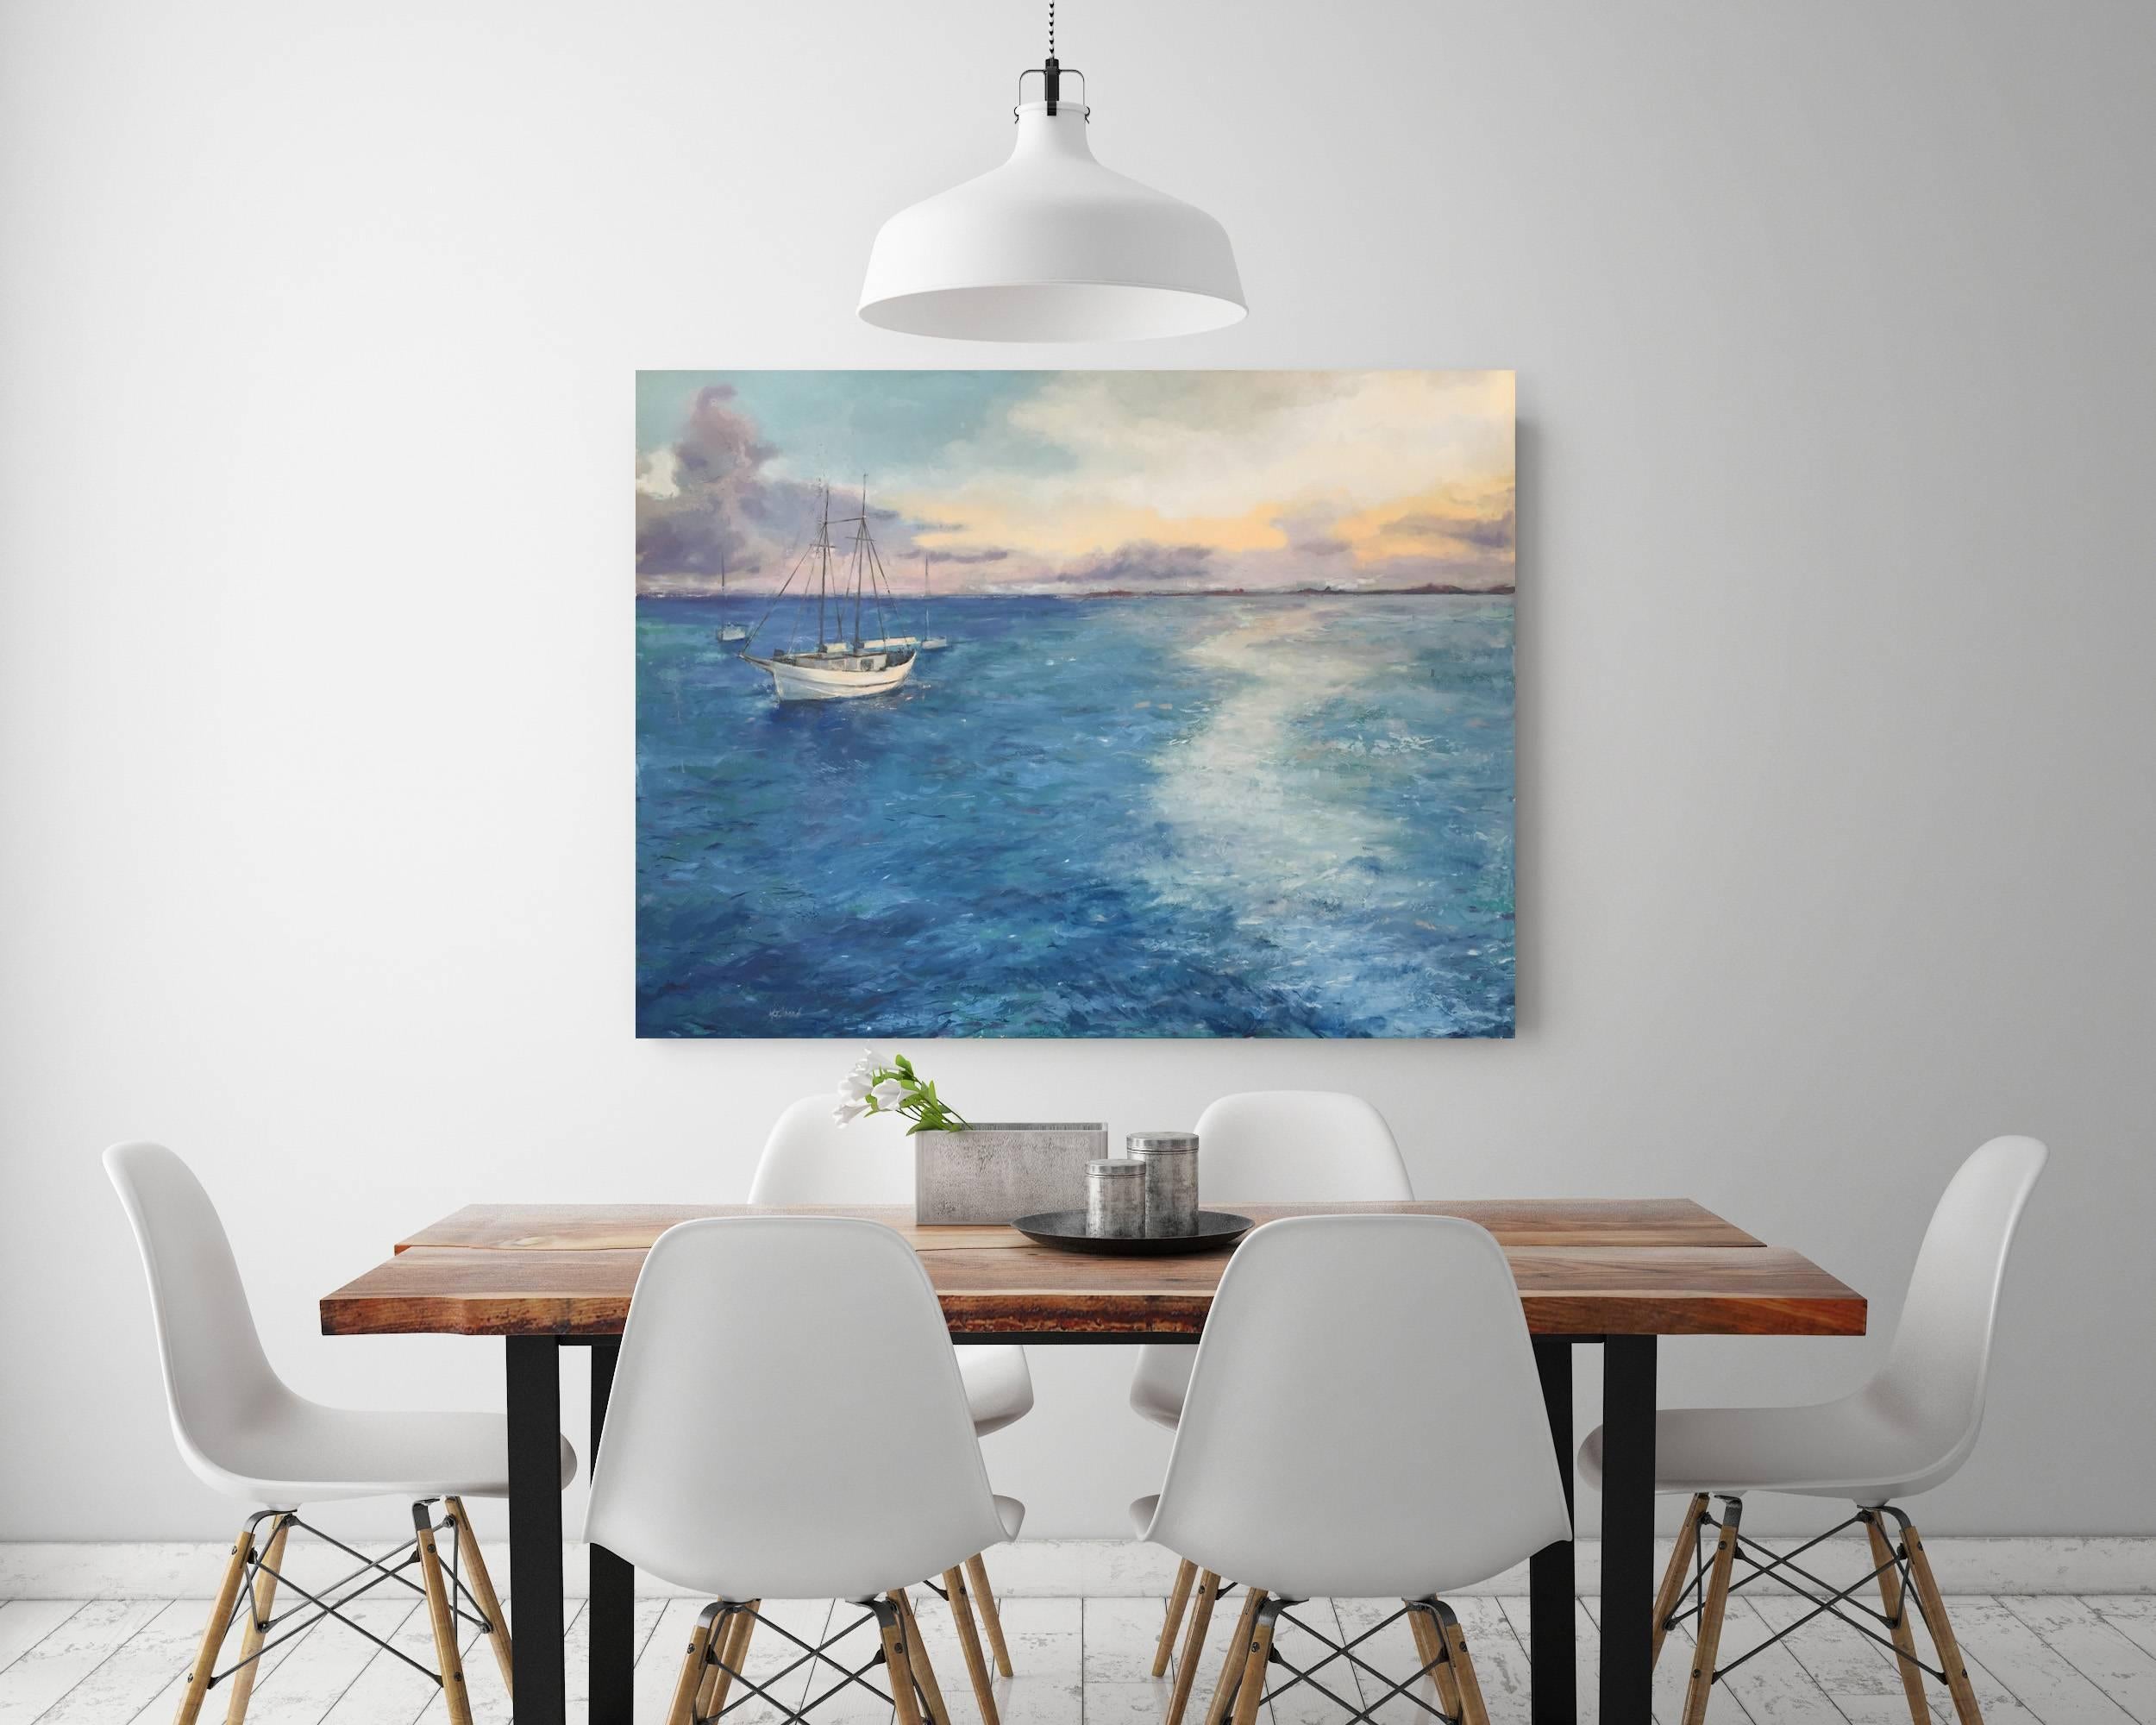 Caribbean, blue, water, orange, white, lavender, clouds, sky, waves, ocean, sea, nautical, boat, distance, vacation, beach house, summer, light, impressionist, romantic, calming, exhale, relaxing.

Miranda Girard is an exhibiting and commissioned